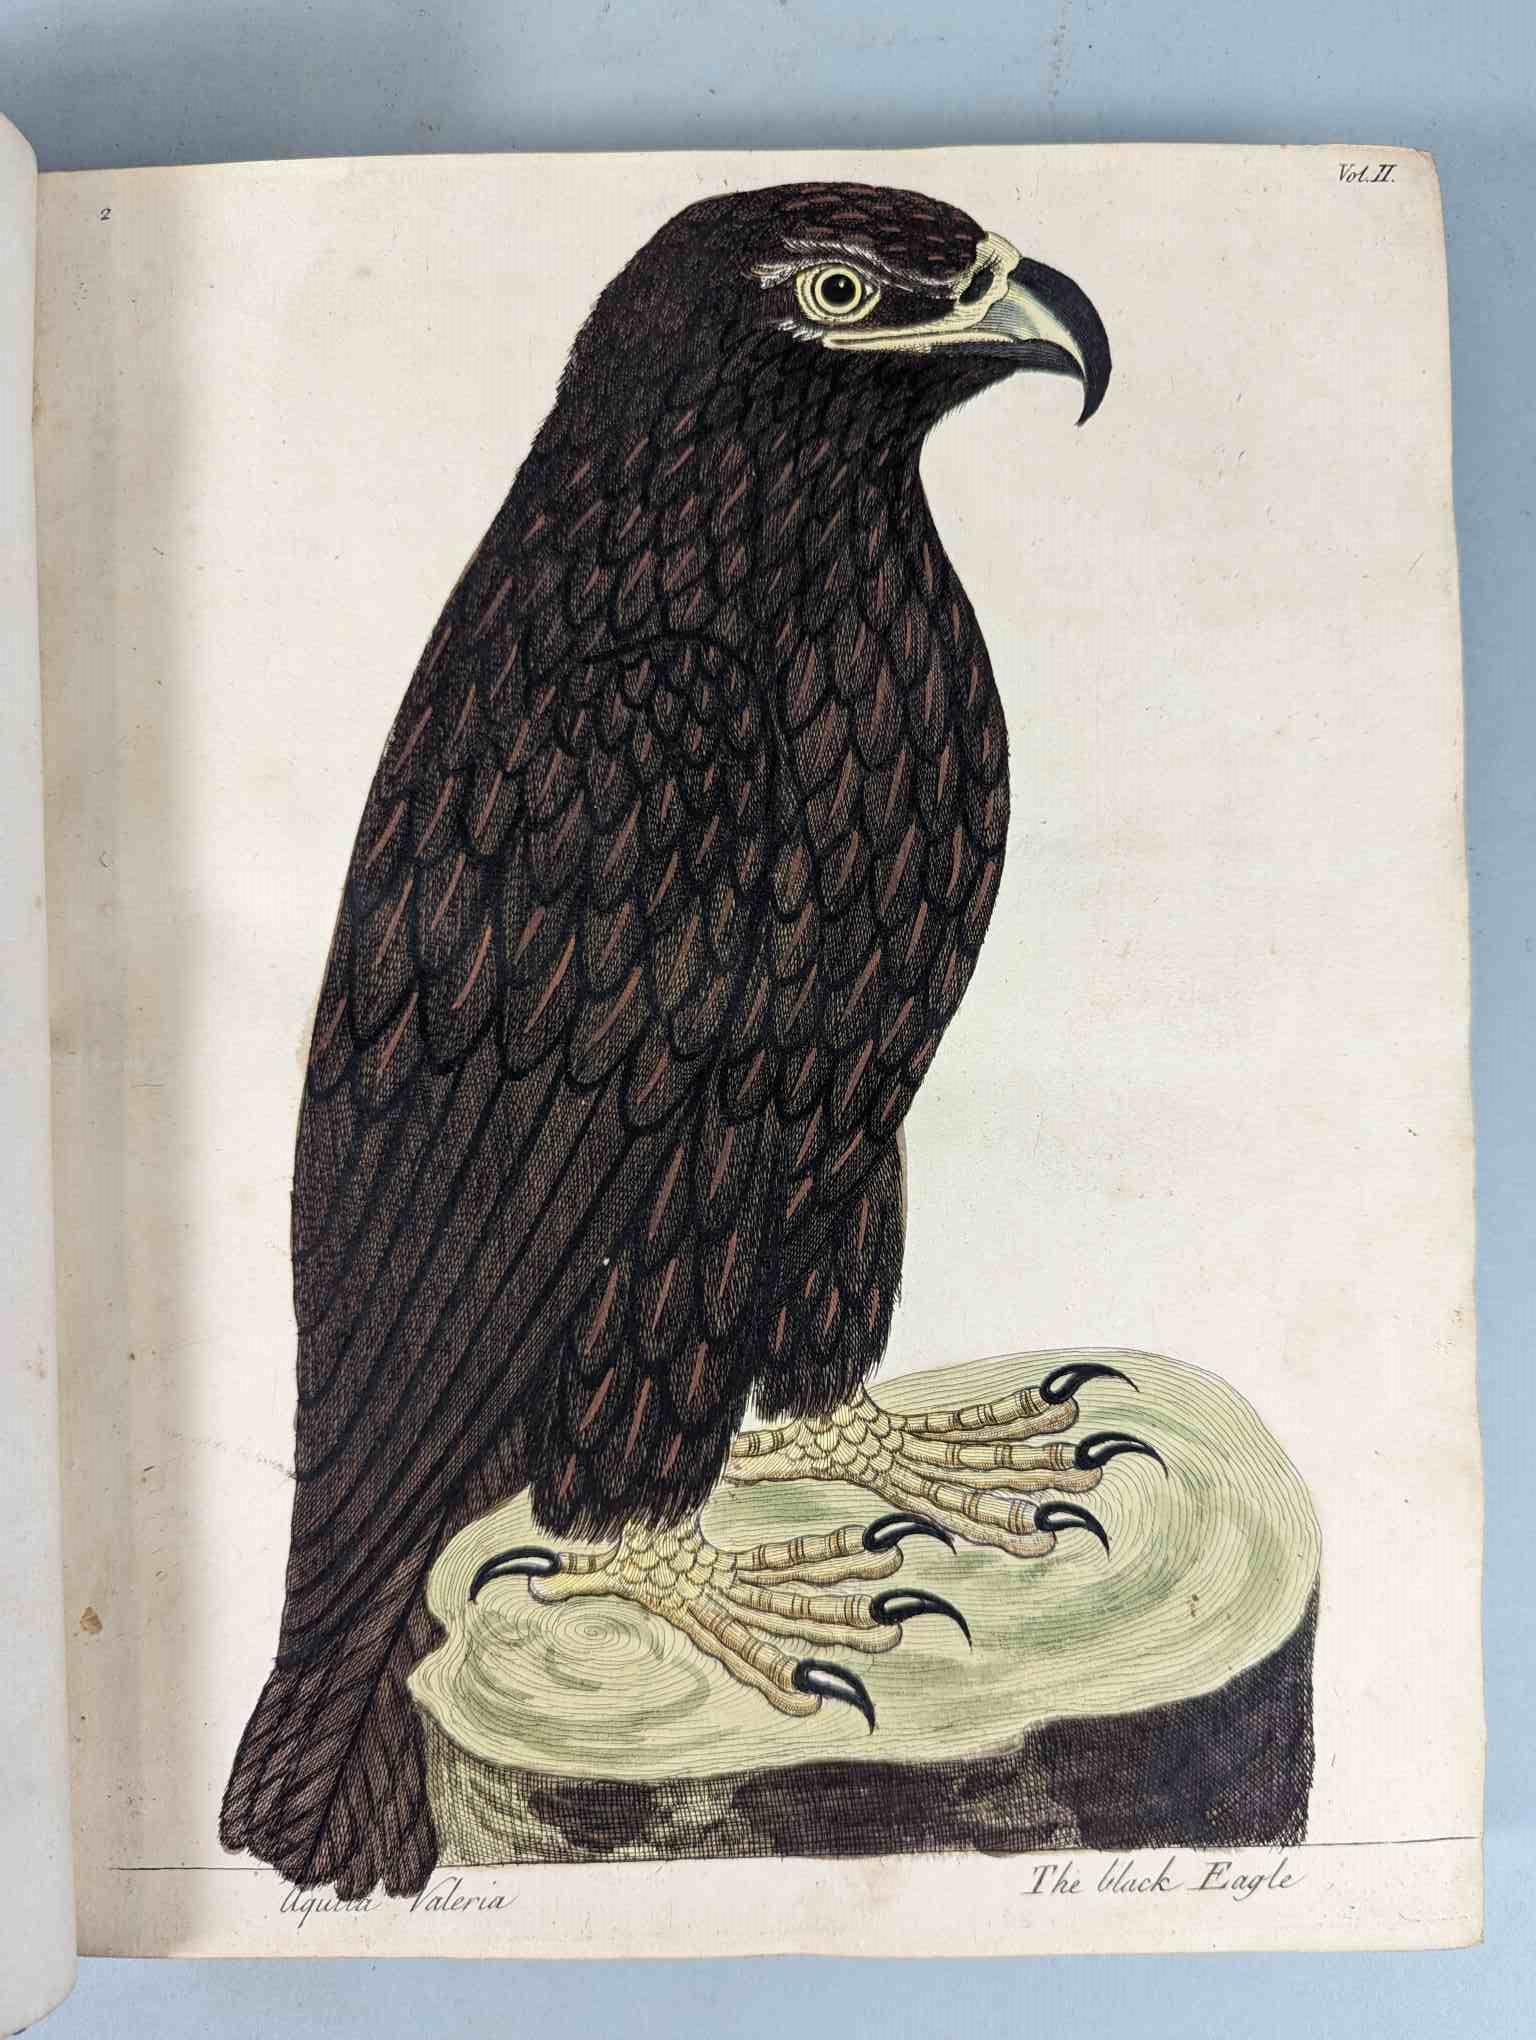 ALBIN, Eleazar. A Natural History of Birds, to which are added, Notes and Observations by W. - Image 106 of 208